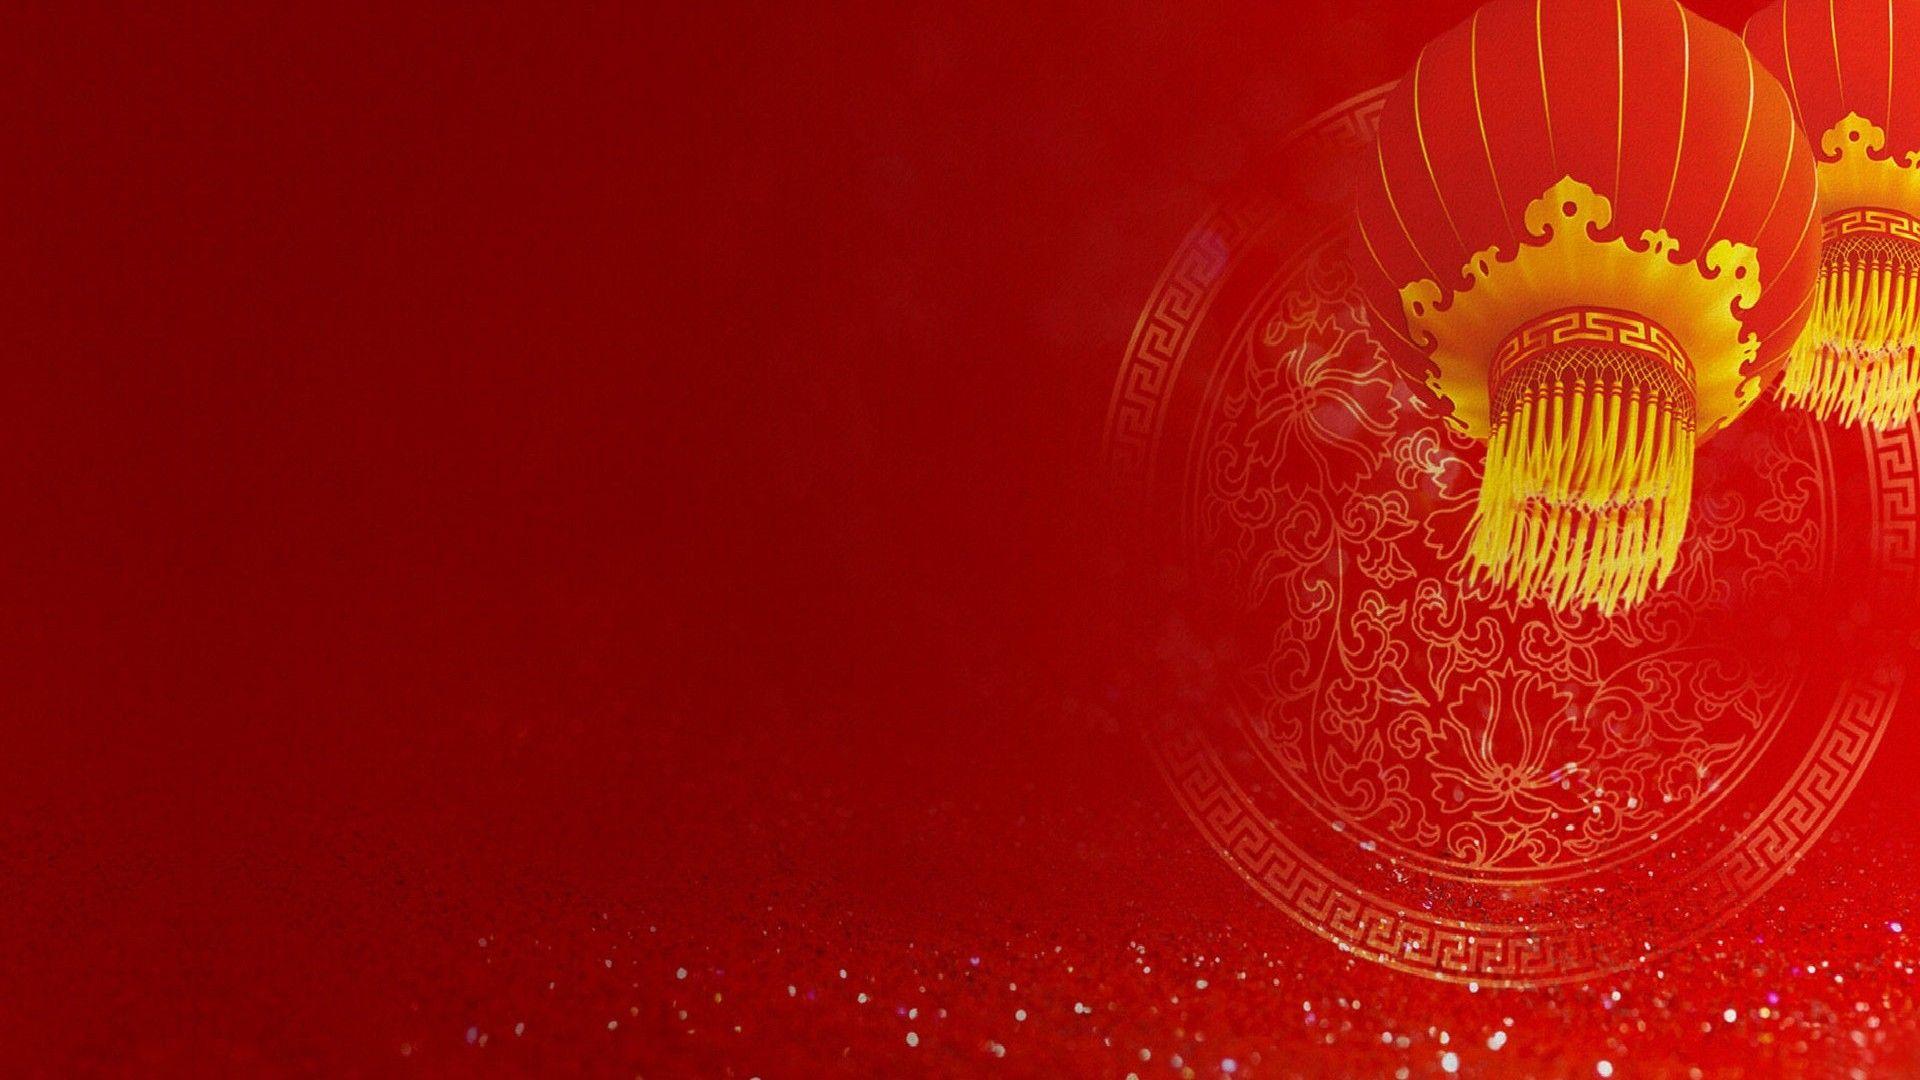 Chinese New Year background for Free. Chinese new